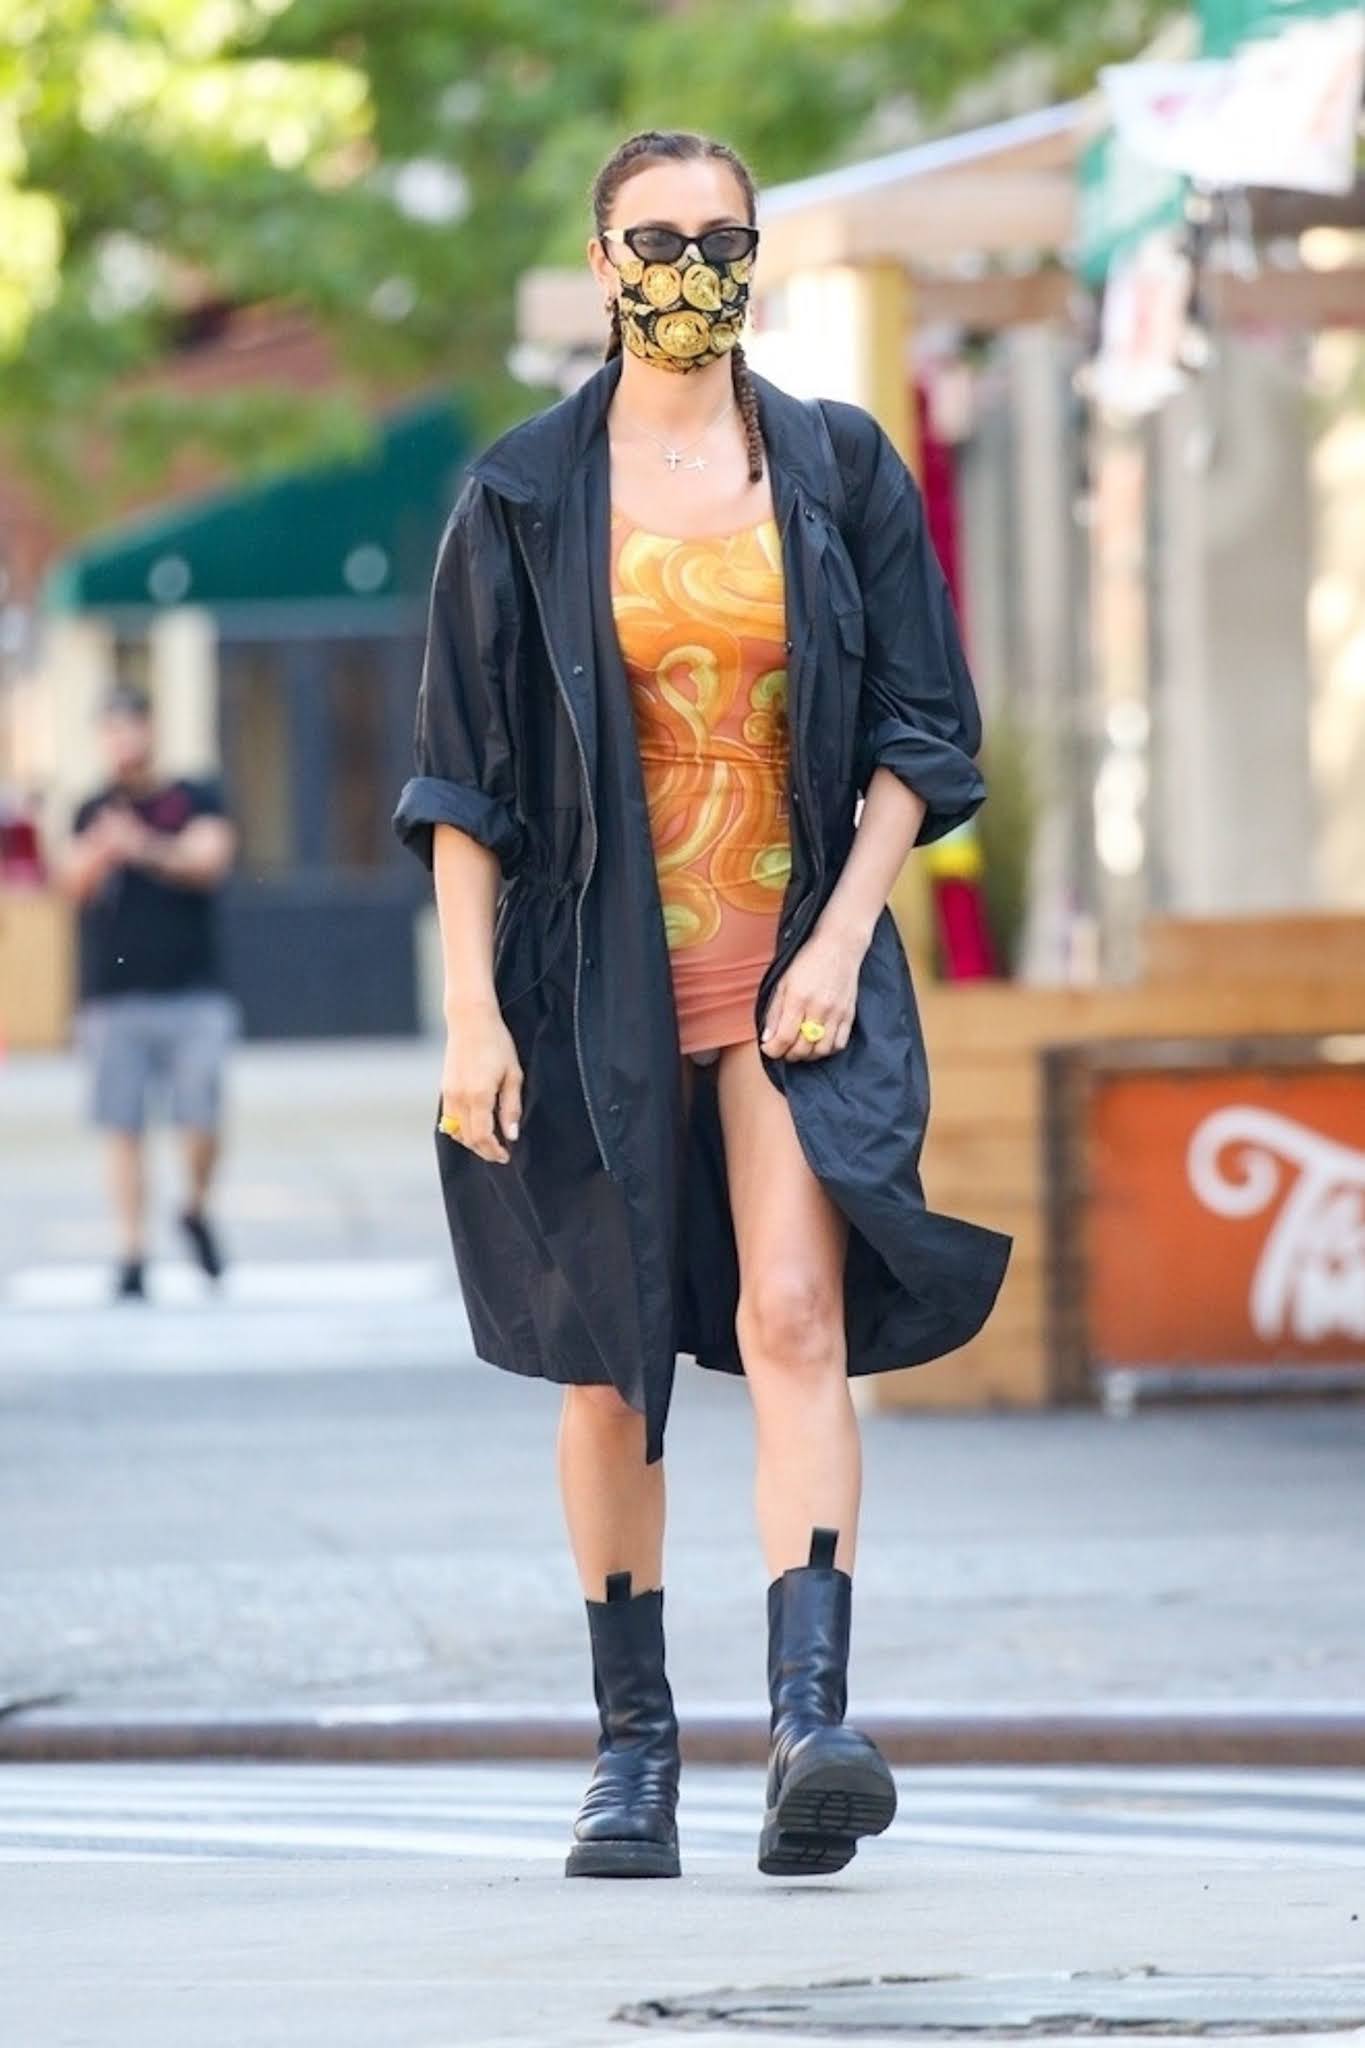 Irina Shayk wearing a tight short dress while out for a morning walk in New York